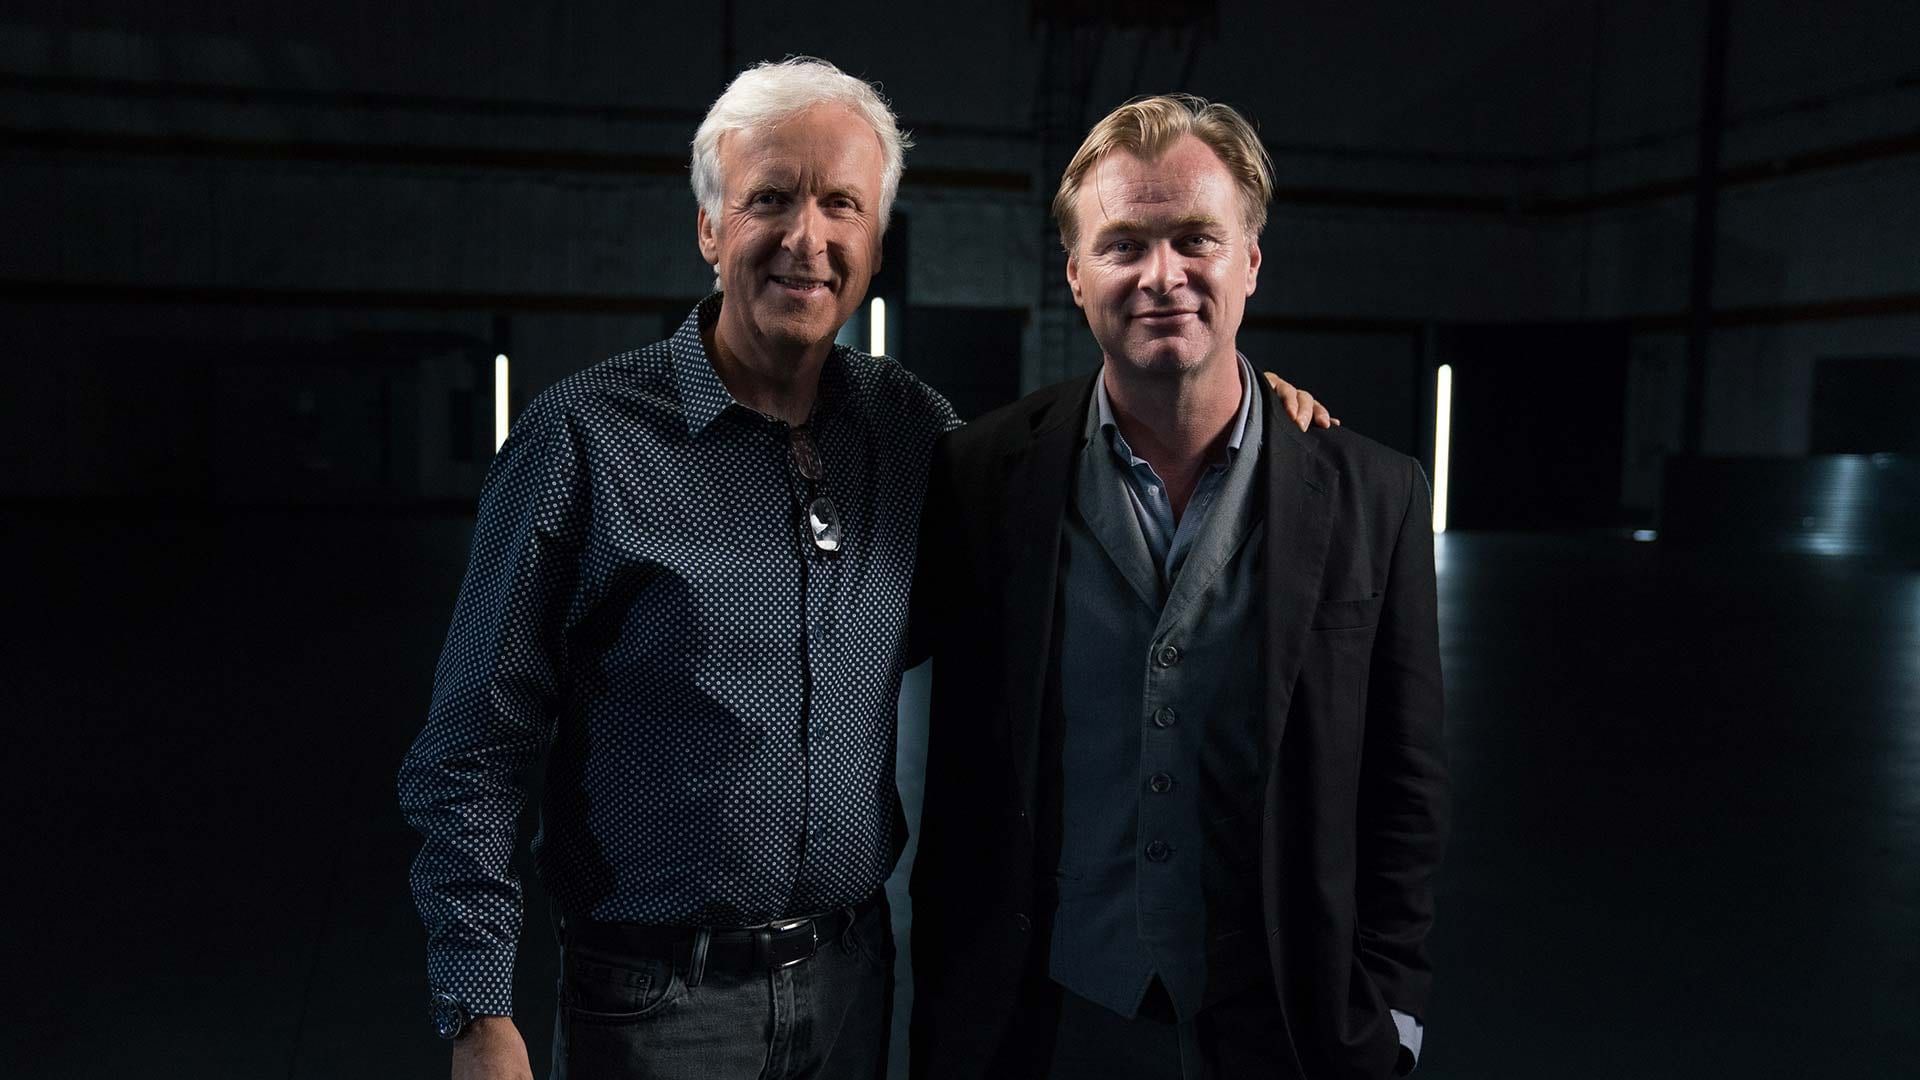 James Cameron's Story of Science Fiction background